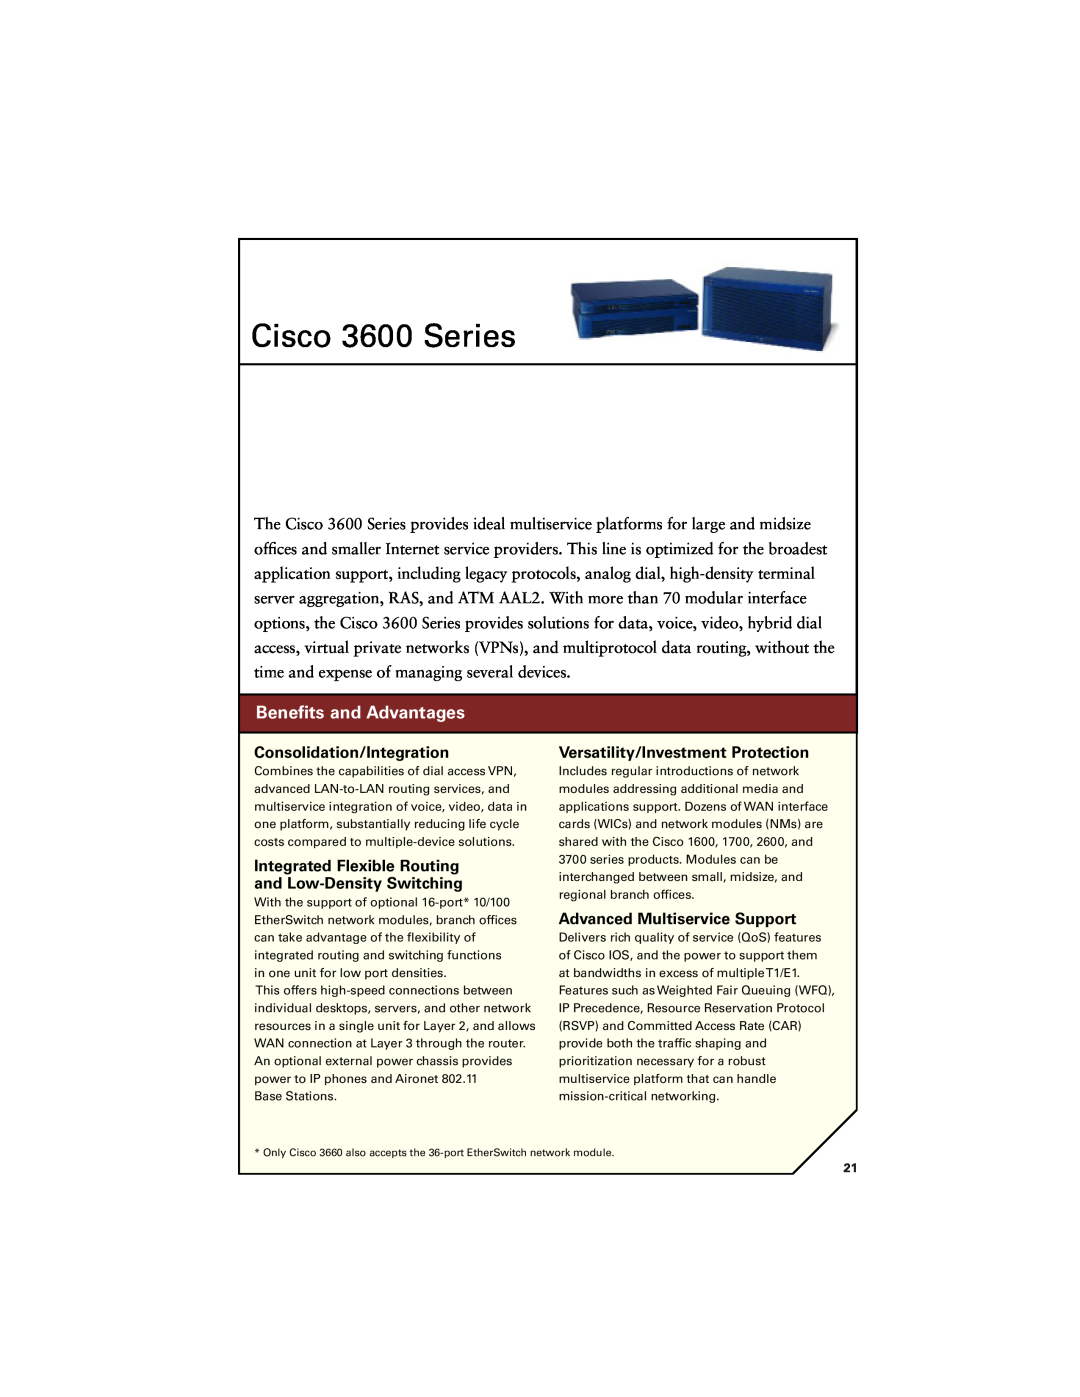 Cisco Systems 7400 Cisco 3600 Series, Beneﬁts and Advantages, Consolidation/Integration, Versatility/Investment Protection 